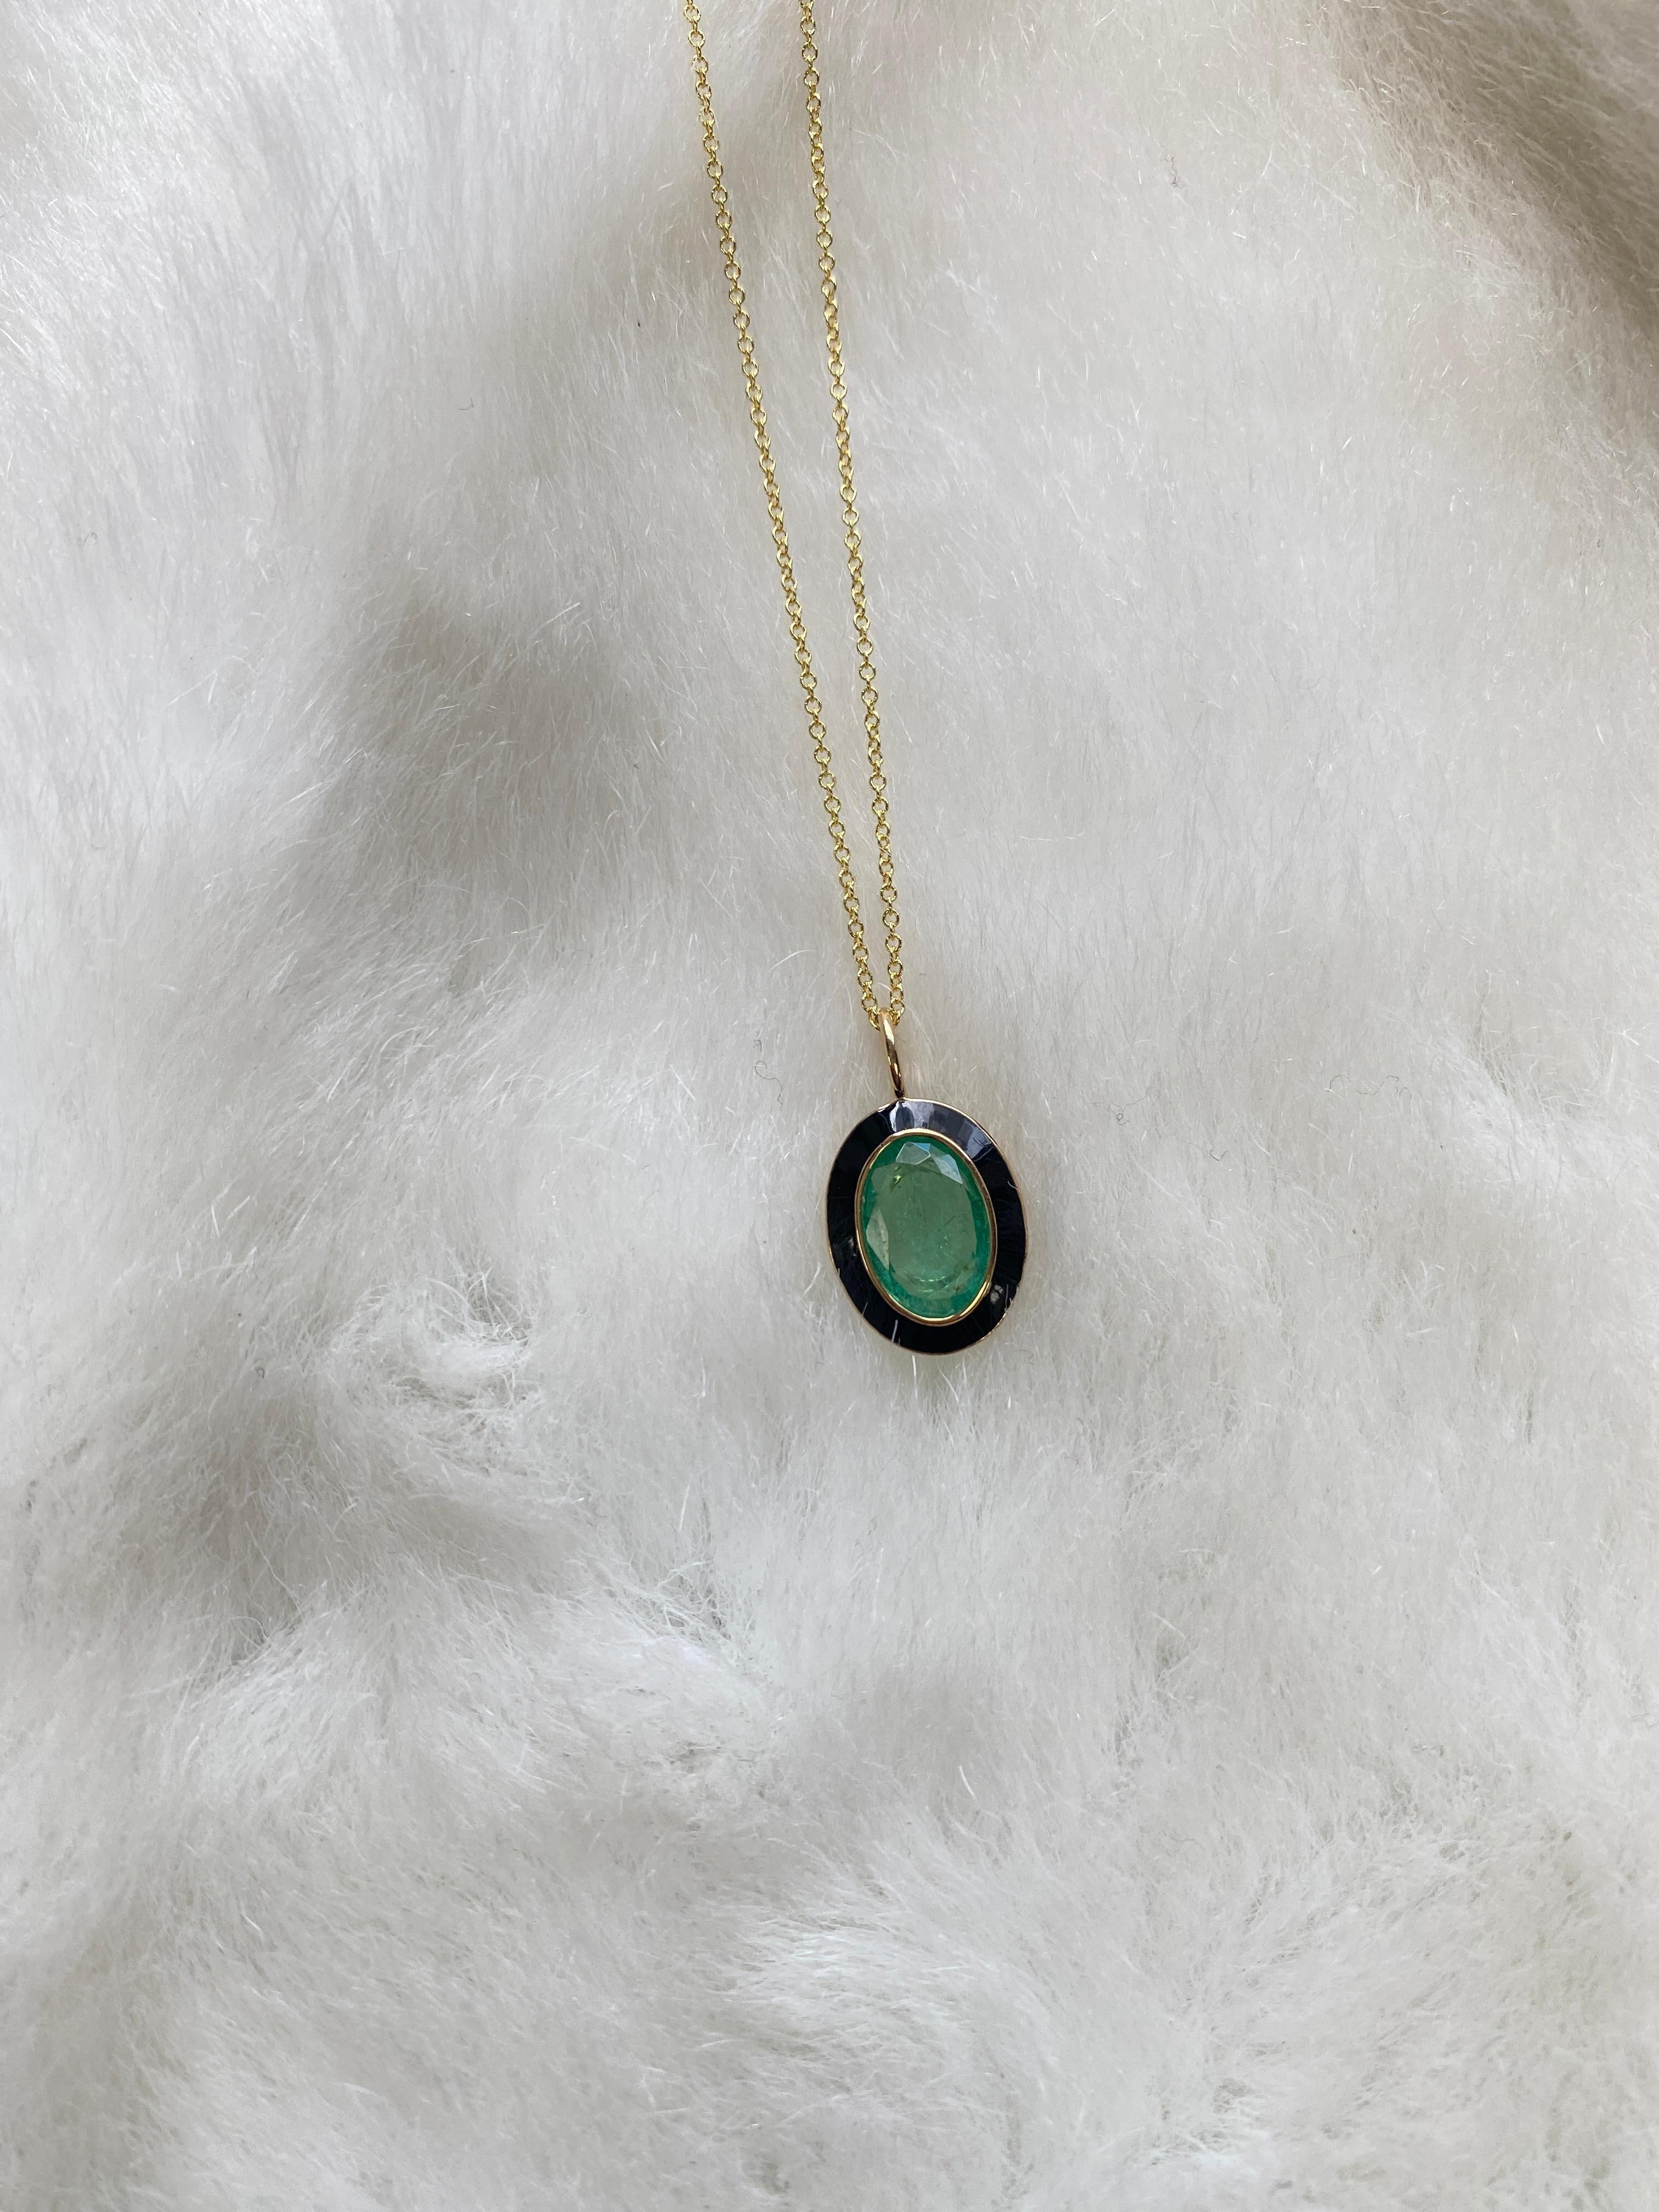 Emerald Oval Pendant with Black Enamel in 18K Yellow Gold, from 'Queen' Collection. The combination of enamel, and Emerald represents power, richness and passion of a true Queen. The feeling of luxury is what we’re aiming for, but at a price point